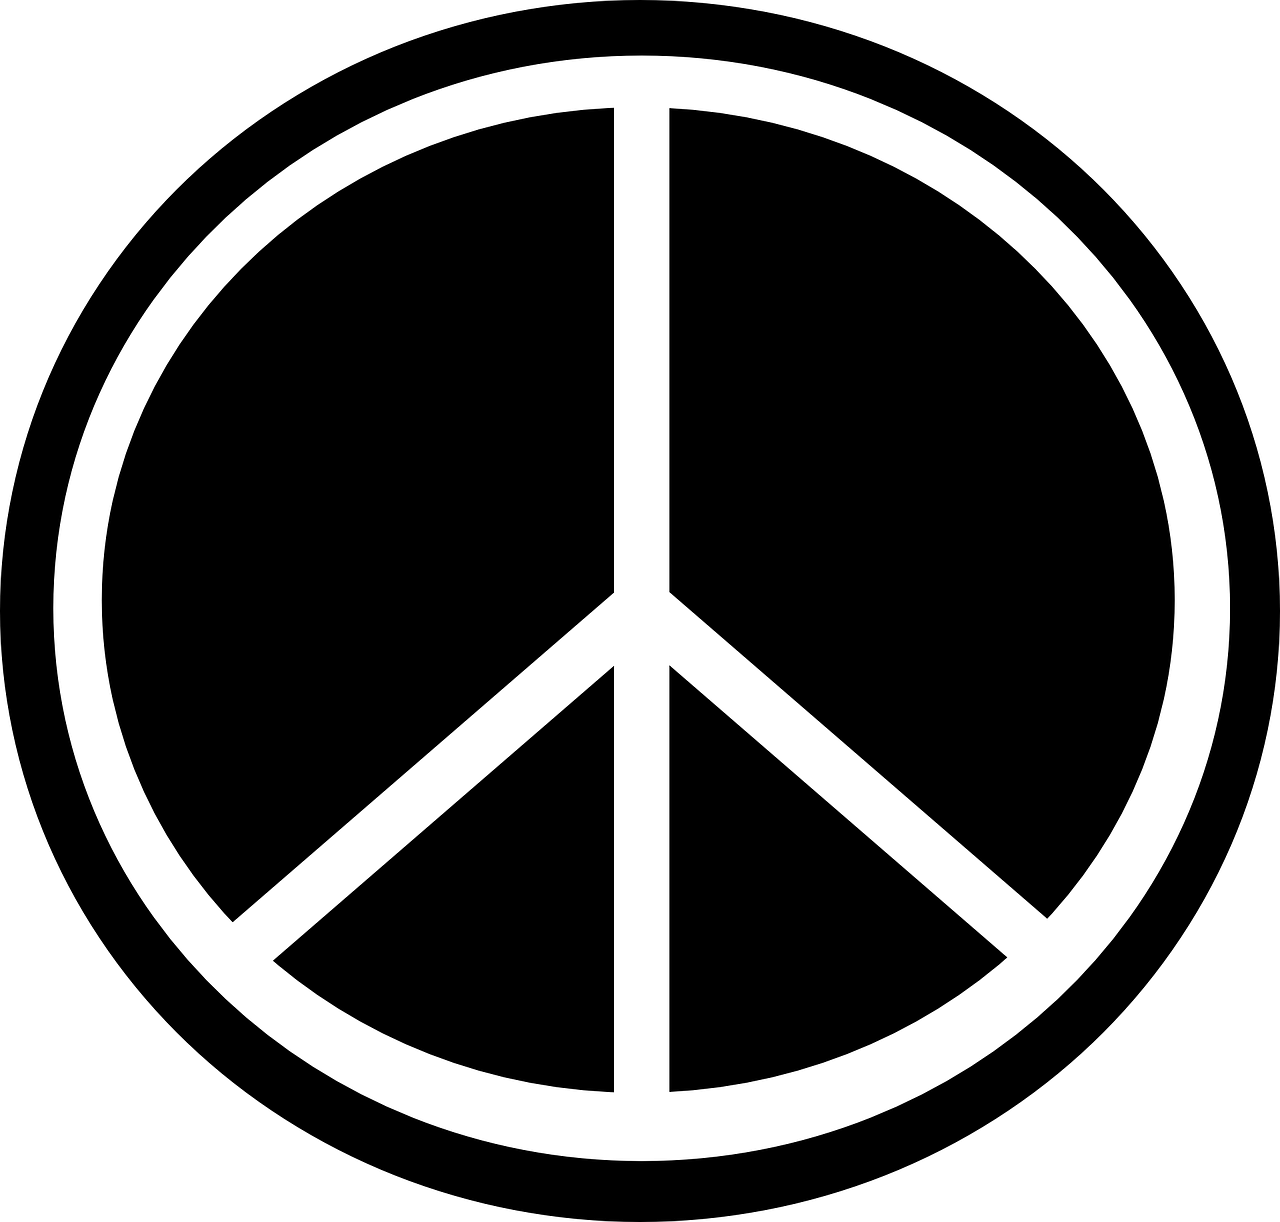 peace,symbols,signs,black,white,harmony,gerald holtom,nuclear disarmament,semaphore,signals,free vector graphics,free pictures, free photos, free images, royalty free, free illustrations, public domain